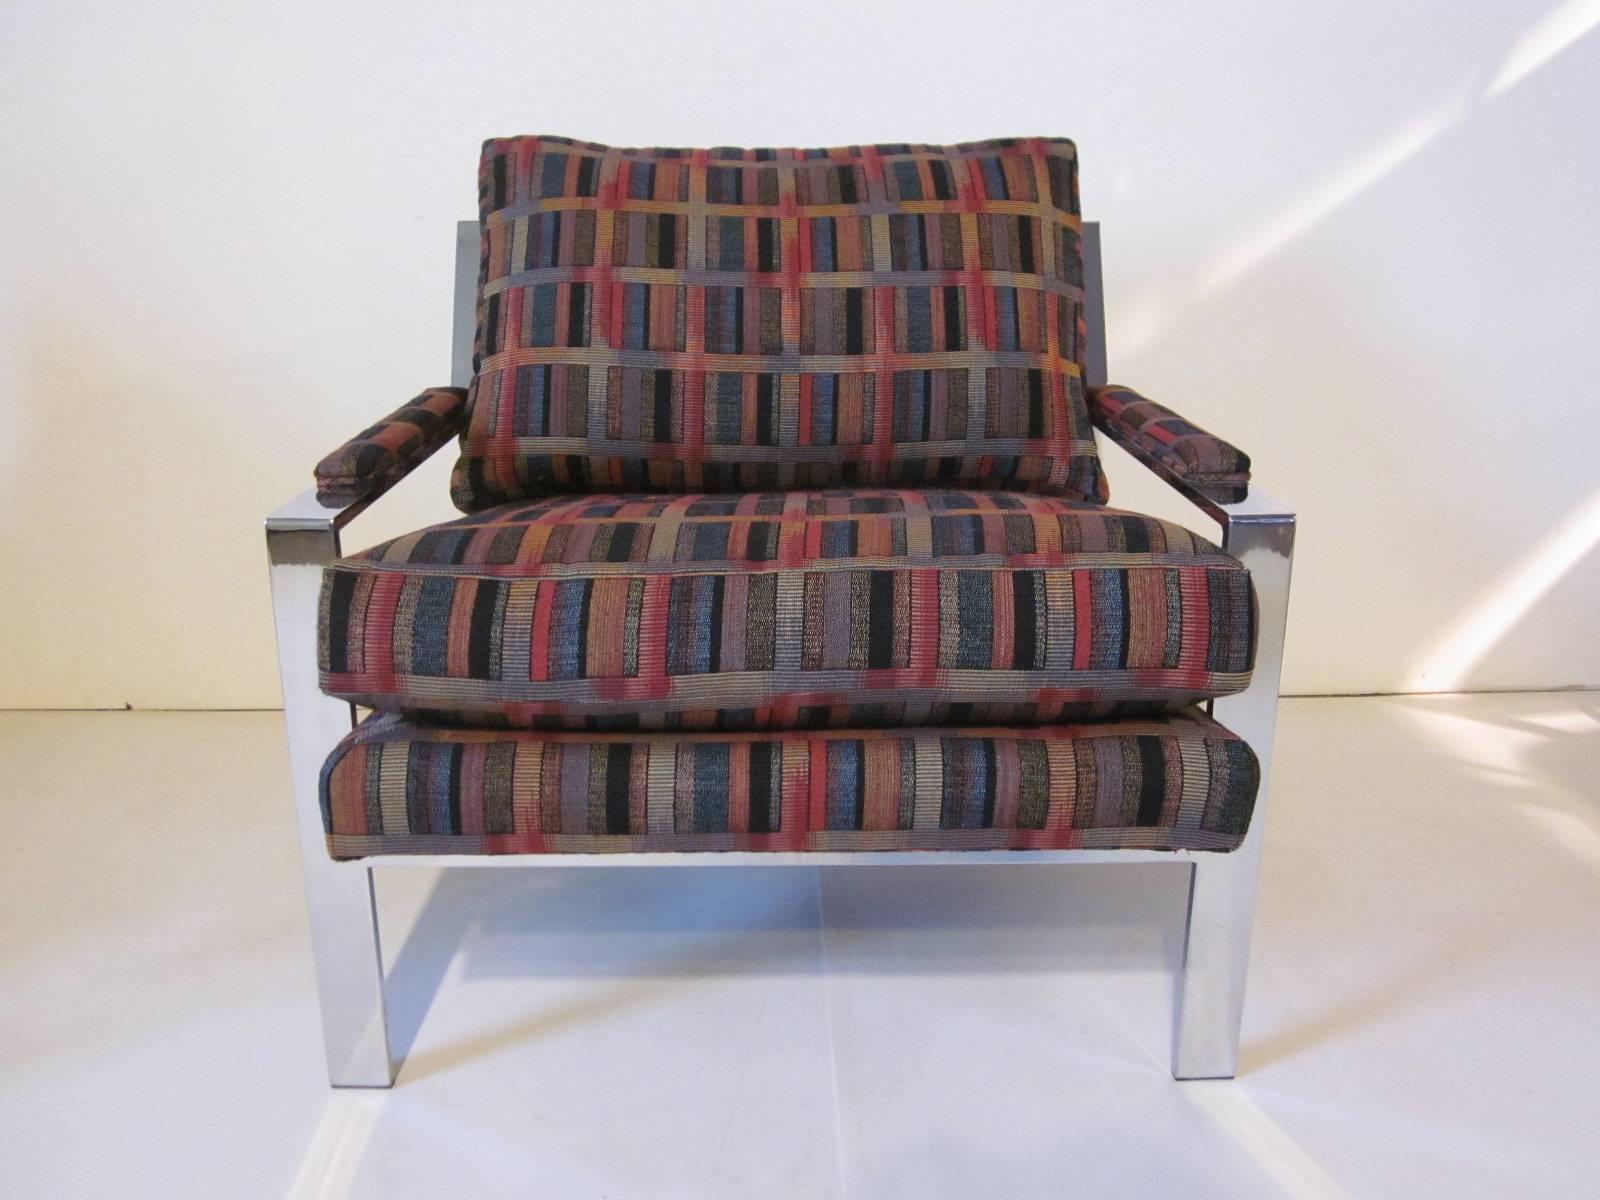 A pair of Baughman chrome framed lounge chairs with peaked rear arm and loose cushion construction, a Classic manufactured by Thayer Coggin furniture company.